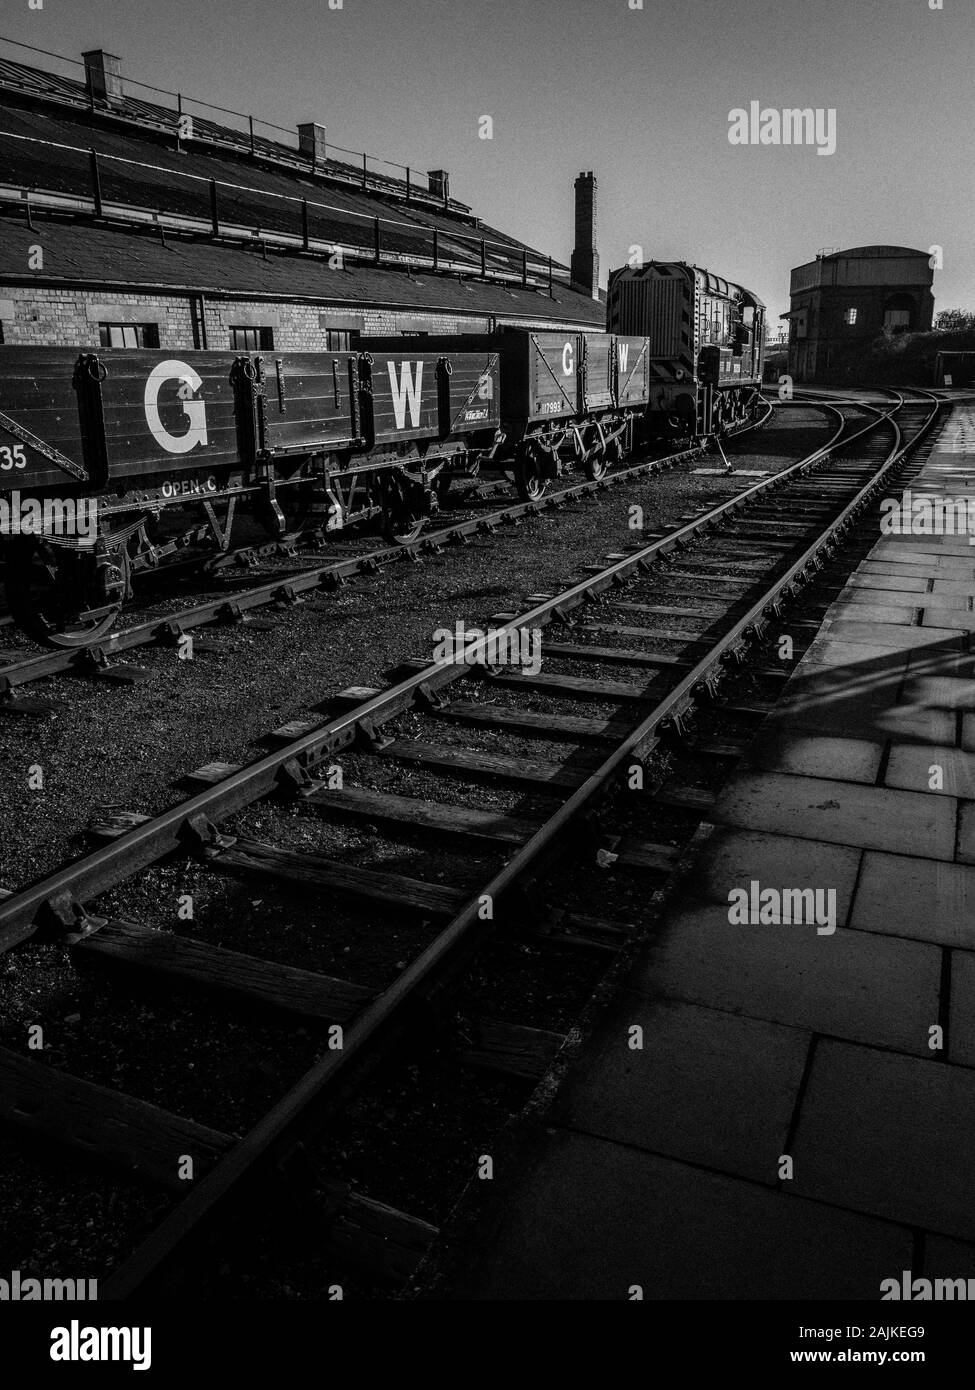 Black and White Landscape of Train Yard, GWR, GW, Didcot Railway Centre, Didcot, Oxfordshire, England, UK, GB. Stock Photo